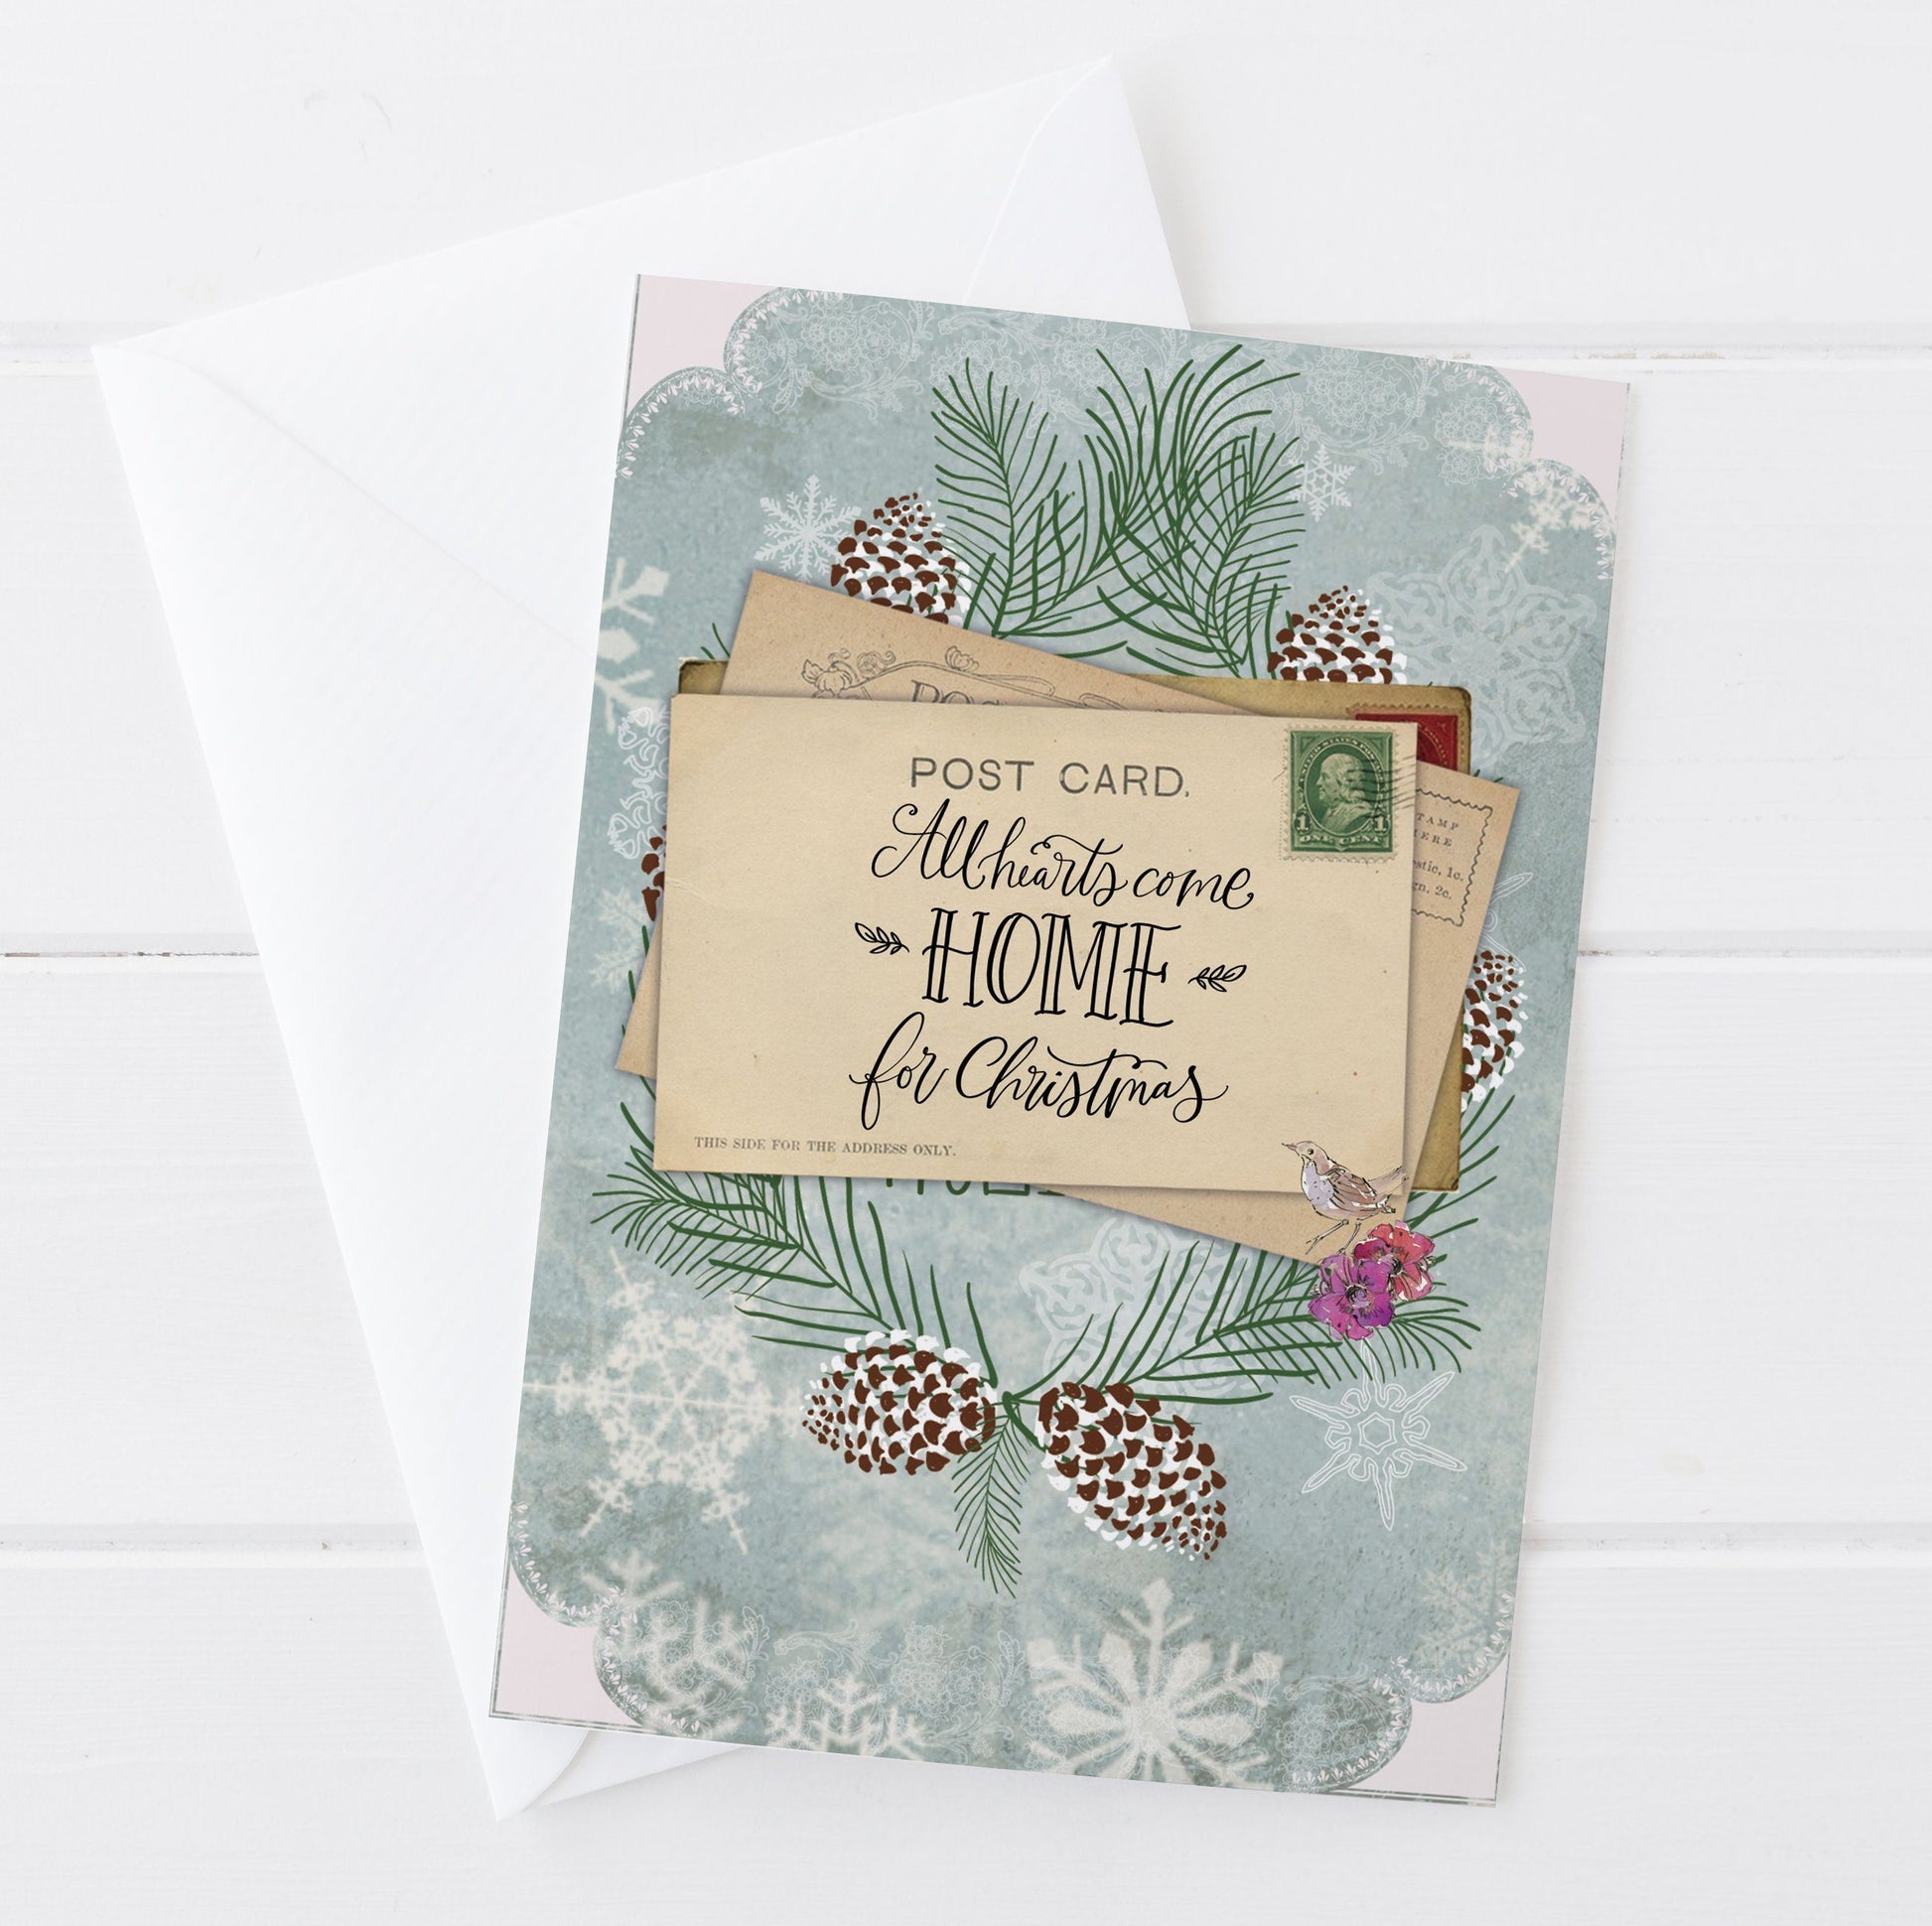 All hearts come home for Christmas Card